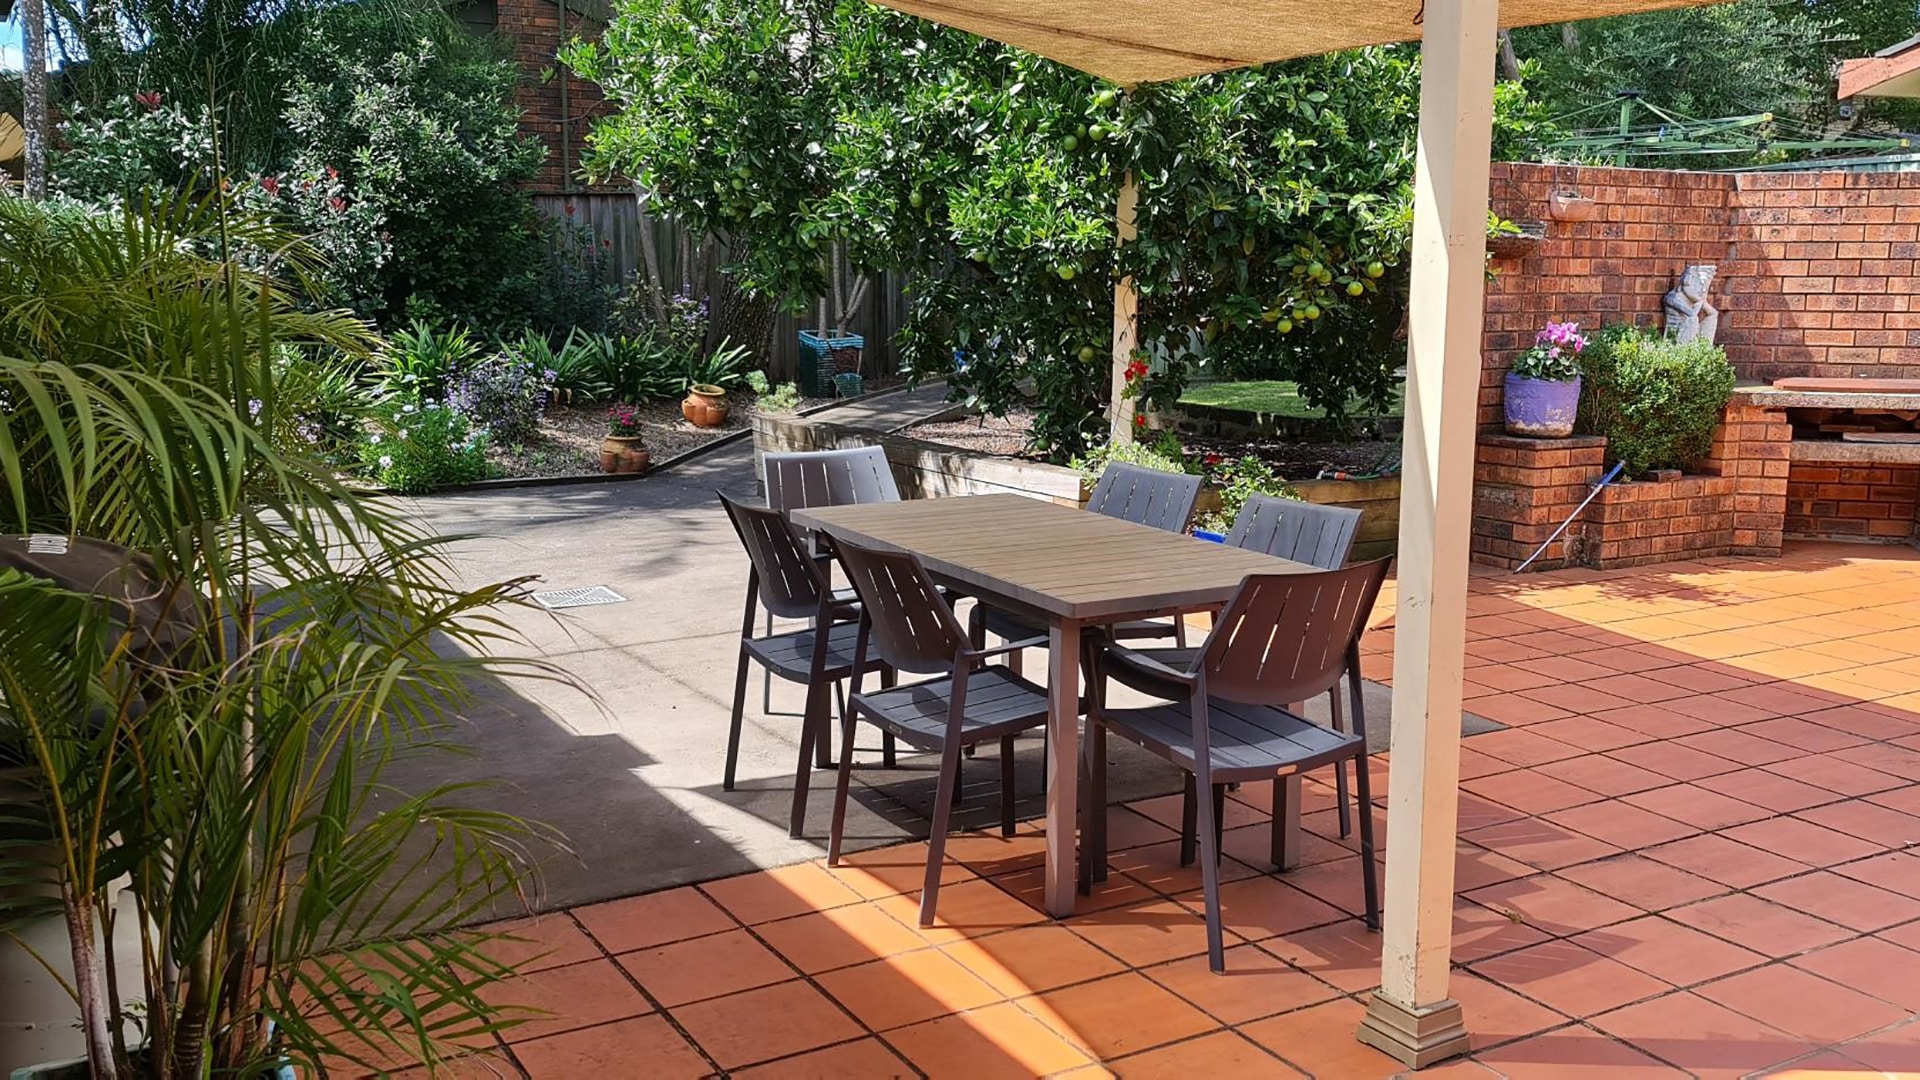 View of the backyard with shaded dining area, garden beds and trees.